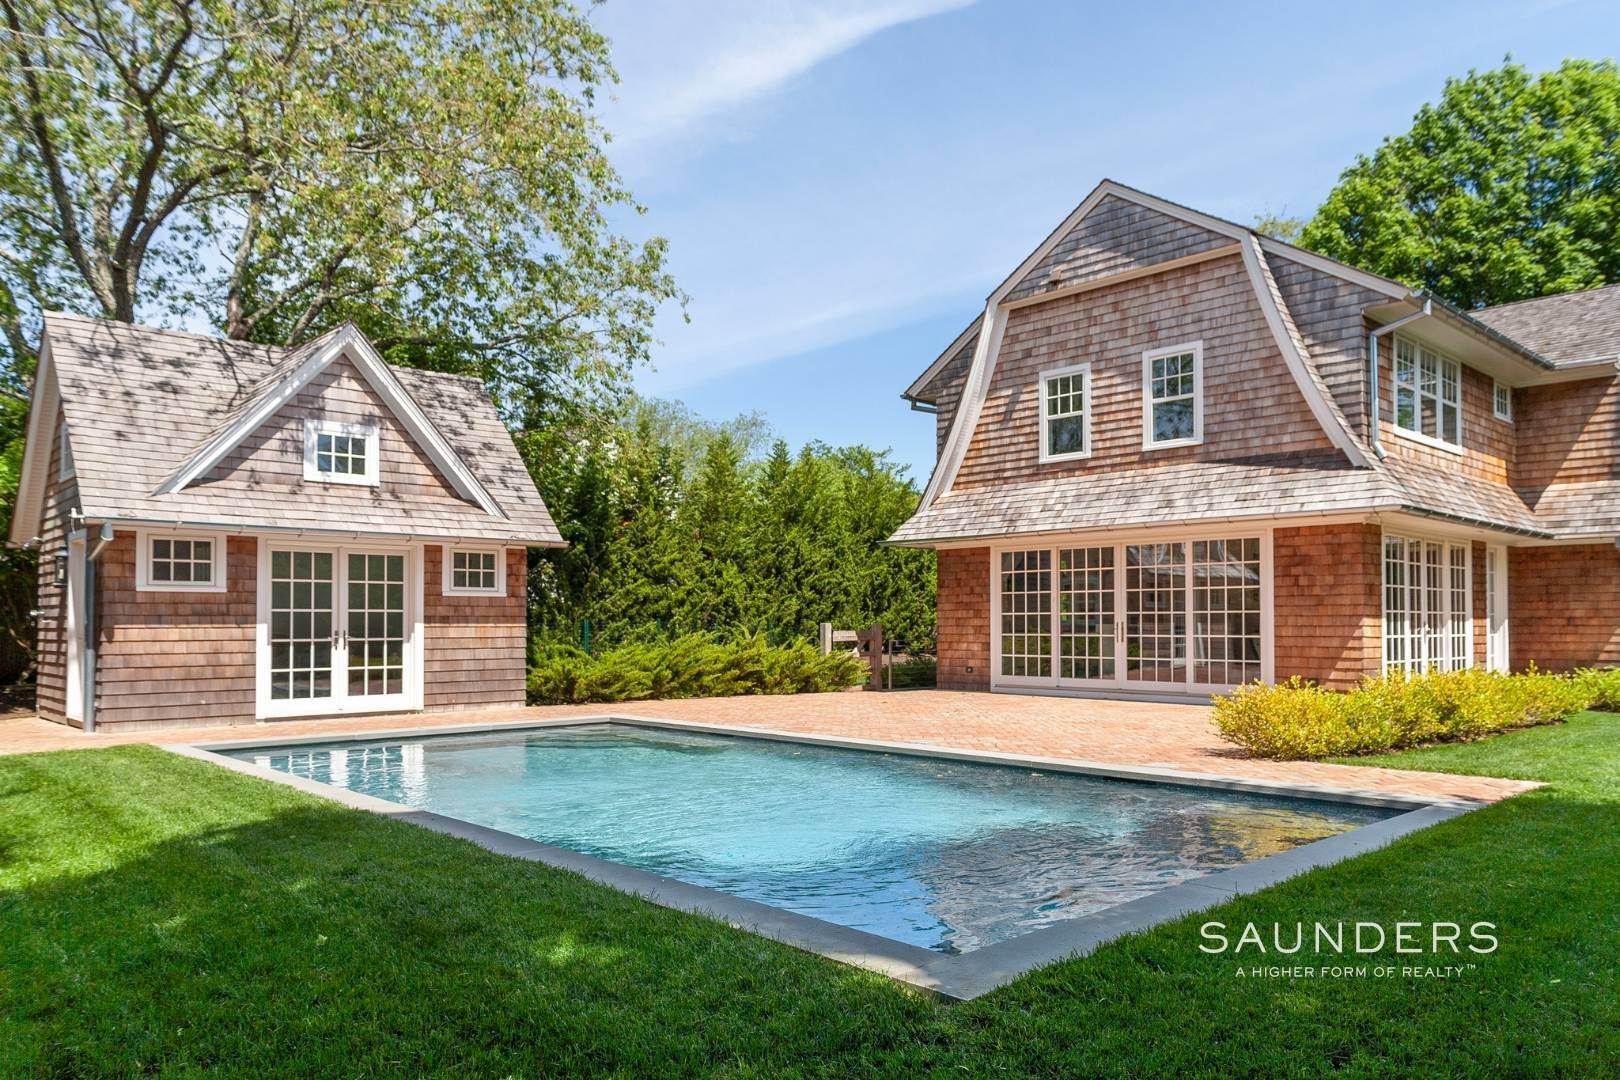 Single Family Homes for Sale at East Hampton New Construction Contemporary Blocks To Village 52 Miller Lane East, East Hampton North, East Hampton, NY 11937